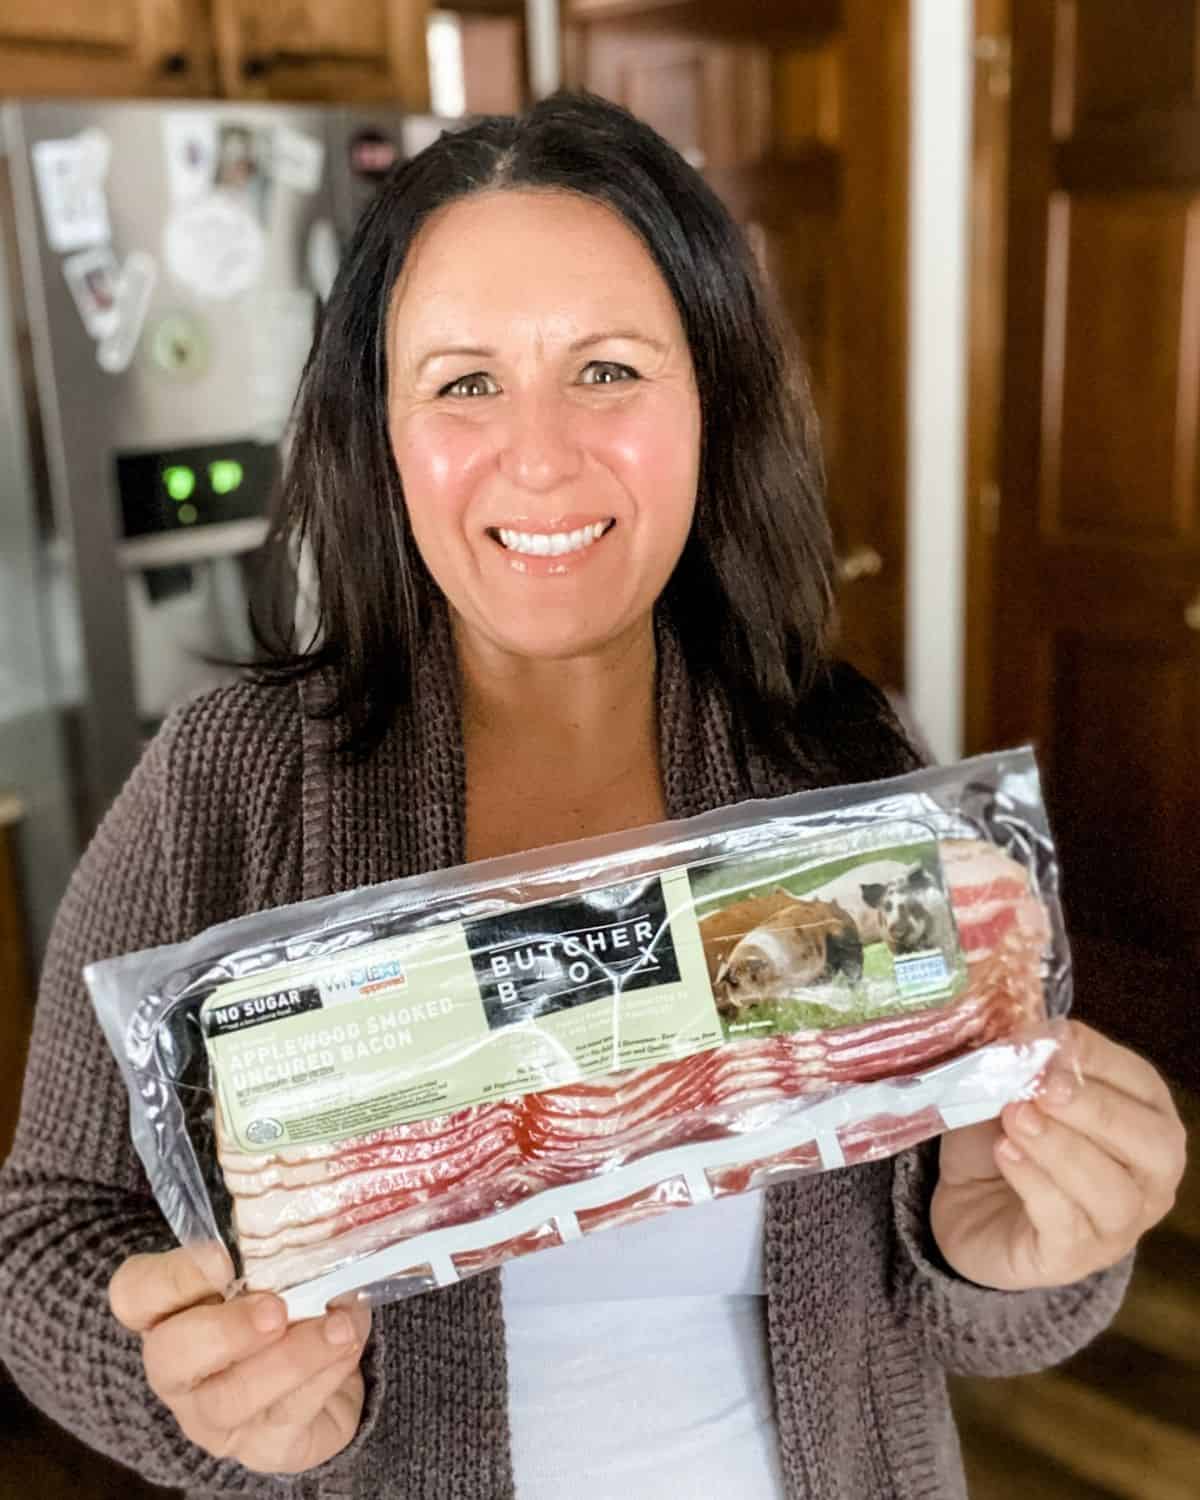 Tammy Overhoff holding a package of butcher box bacon.